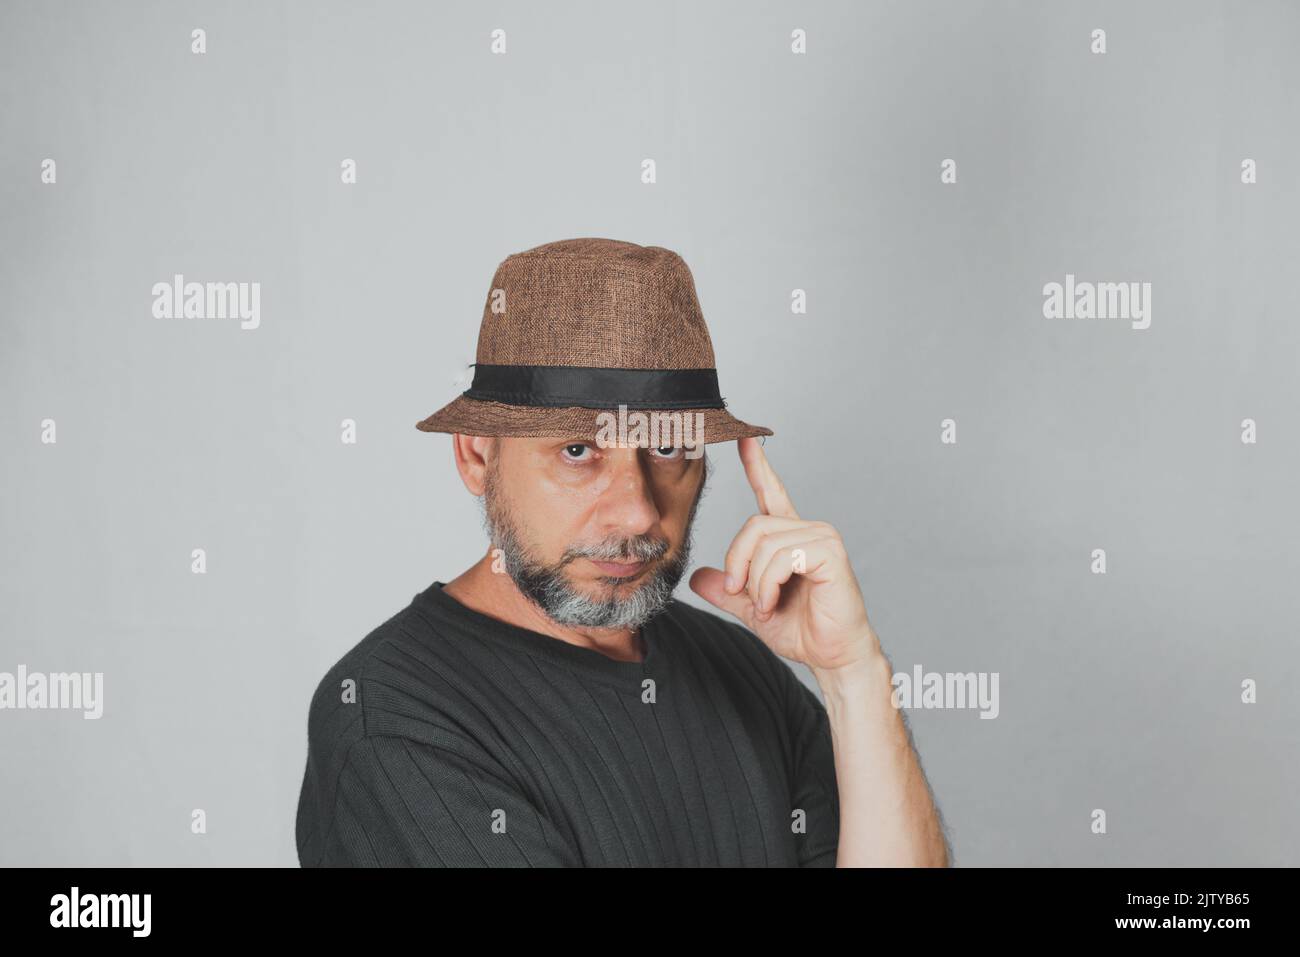 Portrait of mature man standing on white background. Bald bearded man in a brown hat. Formal style. Stock Photo